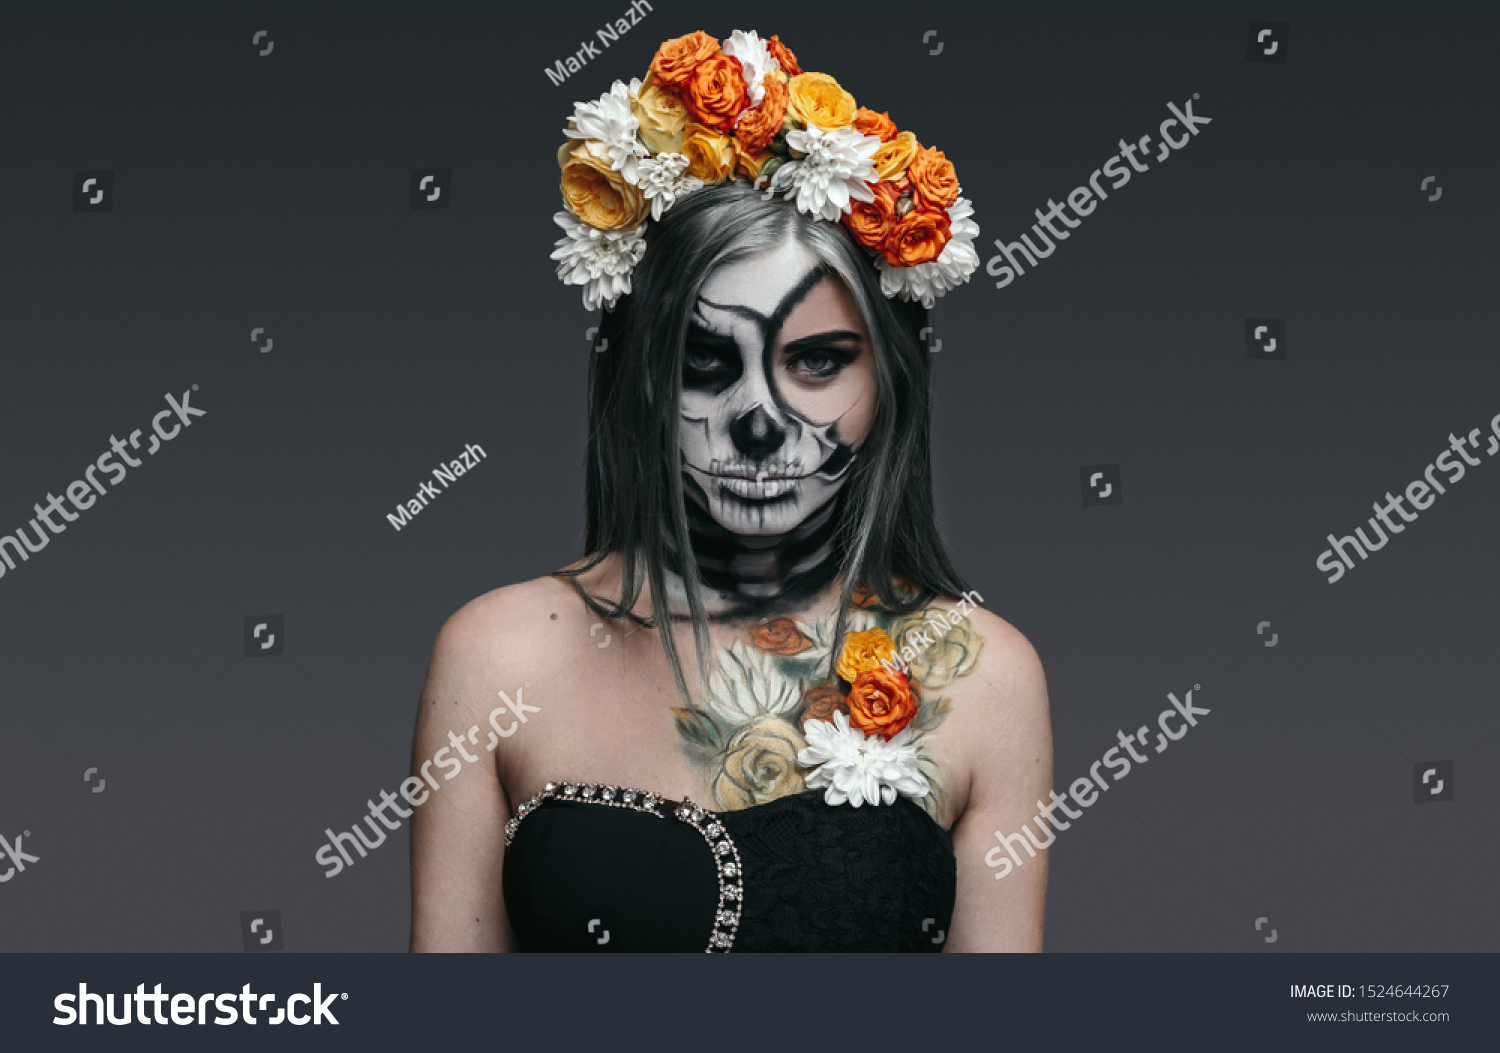 469,864 Traditional lady Images, Stock Photos & Vectors | Shutterstock